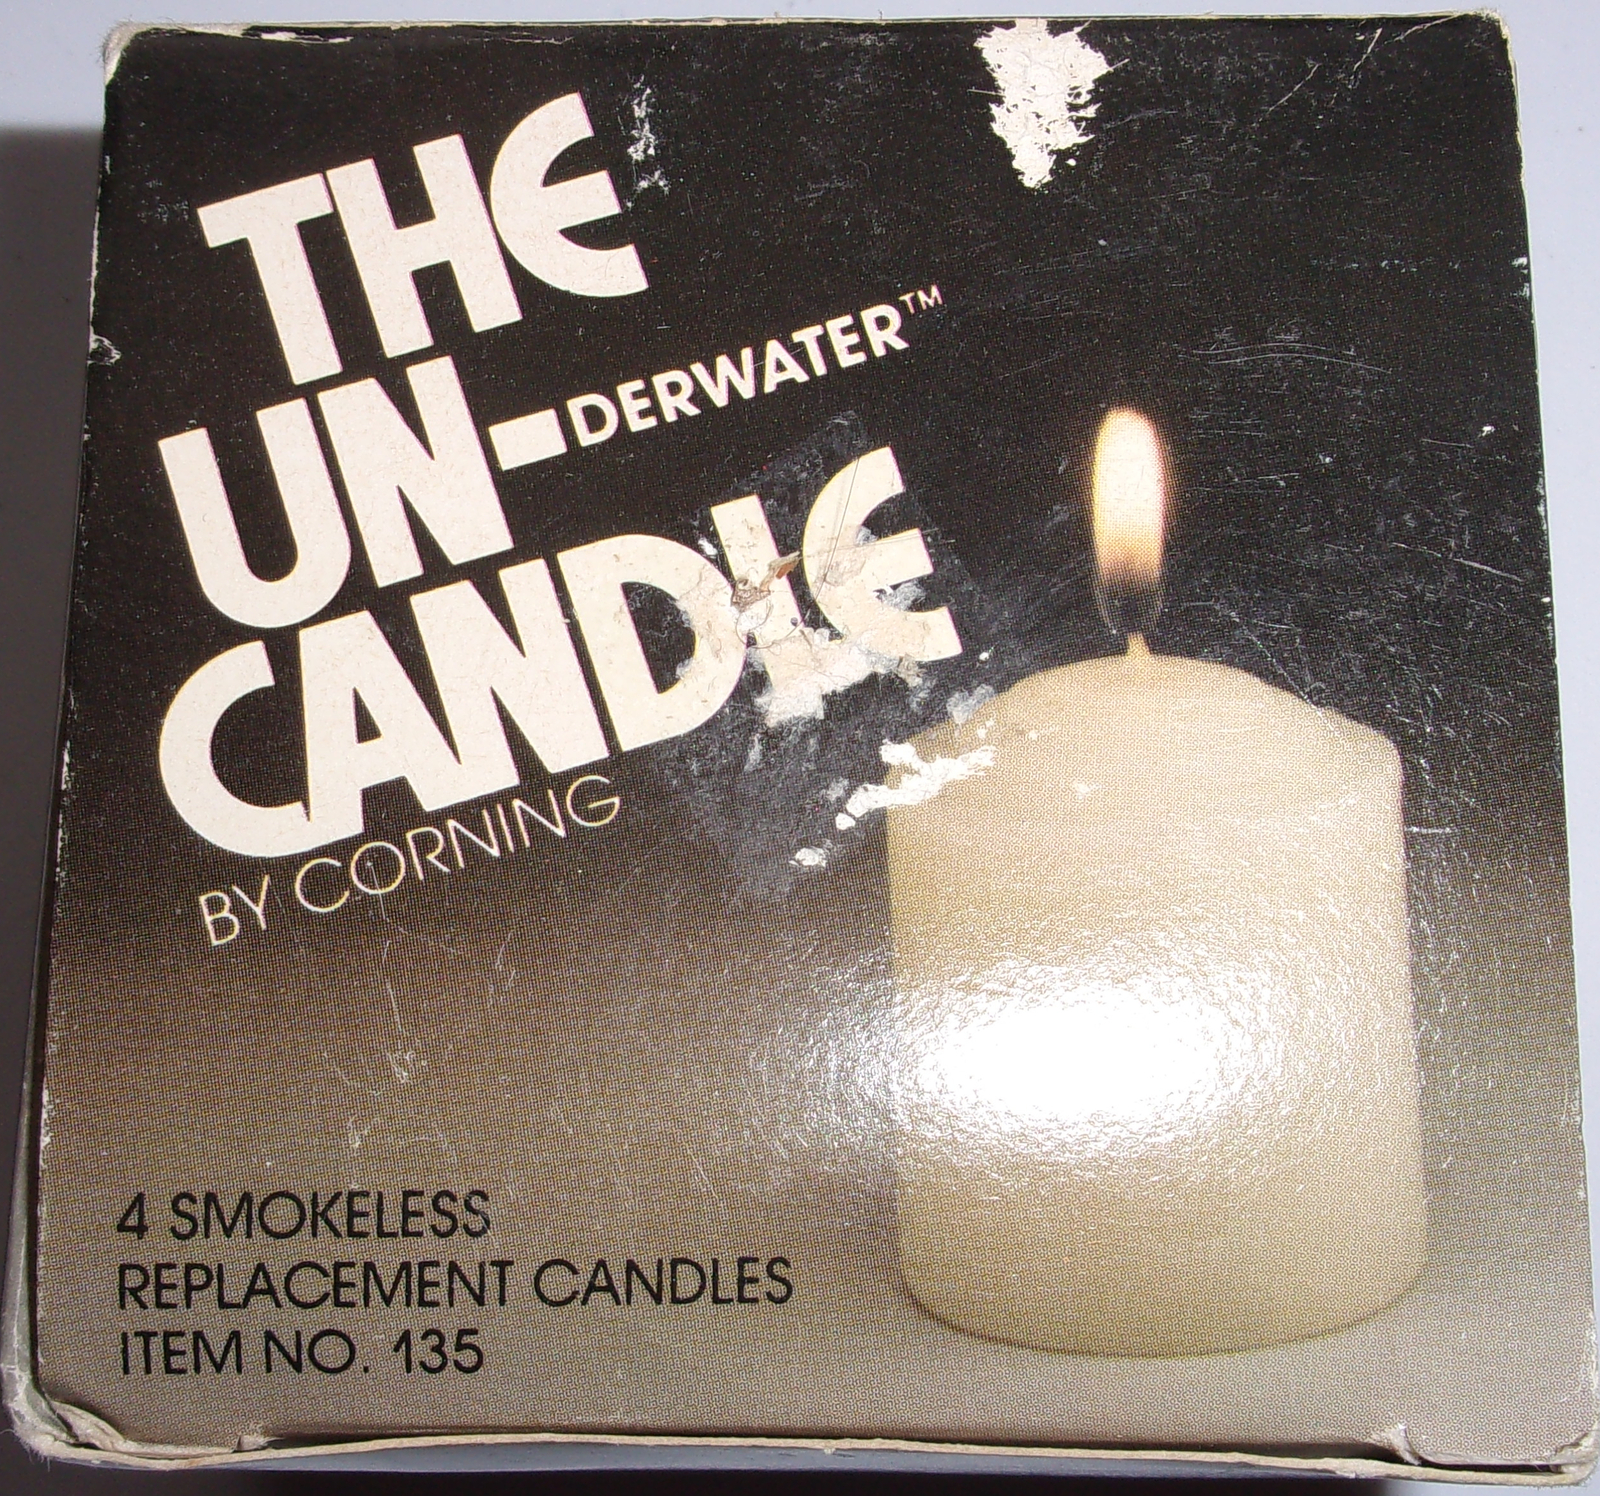 Vintage The Un-Dewater Candle Candles By Corning - $5.99